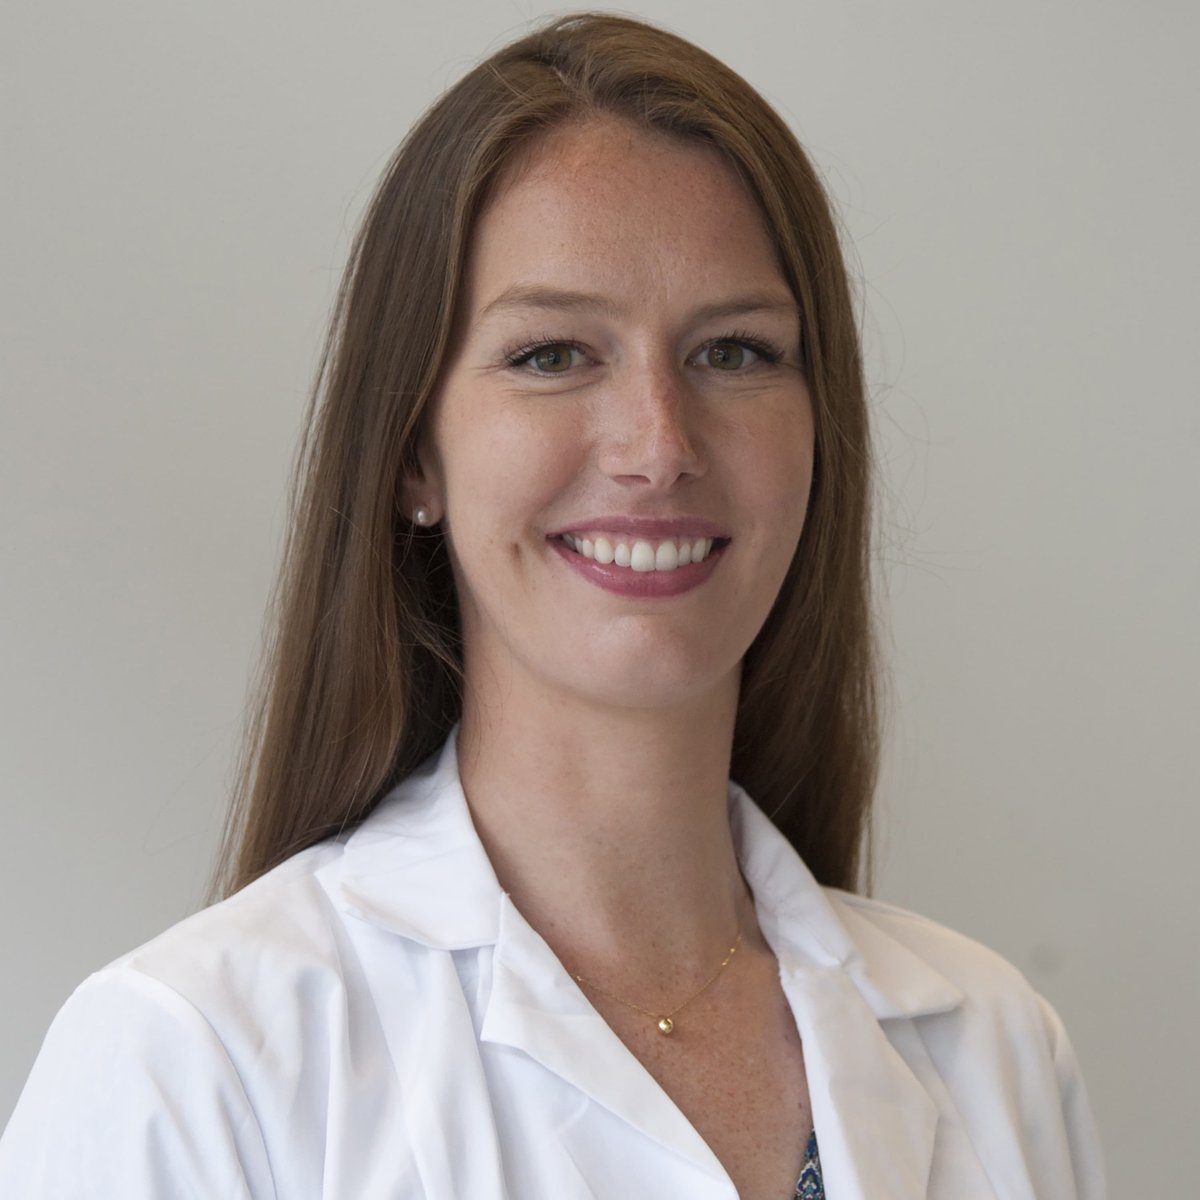 Congratulations to Dr. Hope Caughron who was recognized with the Department of Medicine Clinical Fellow Award. Voted on by @UCSF medicine residents, this award is given to one fellow across all different divisions who exemplifies great teaching. @UCSFMedicine #WIC @UCSF_CVfellows